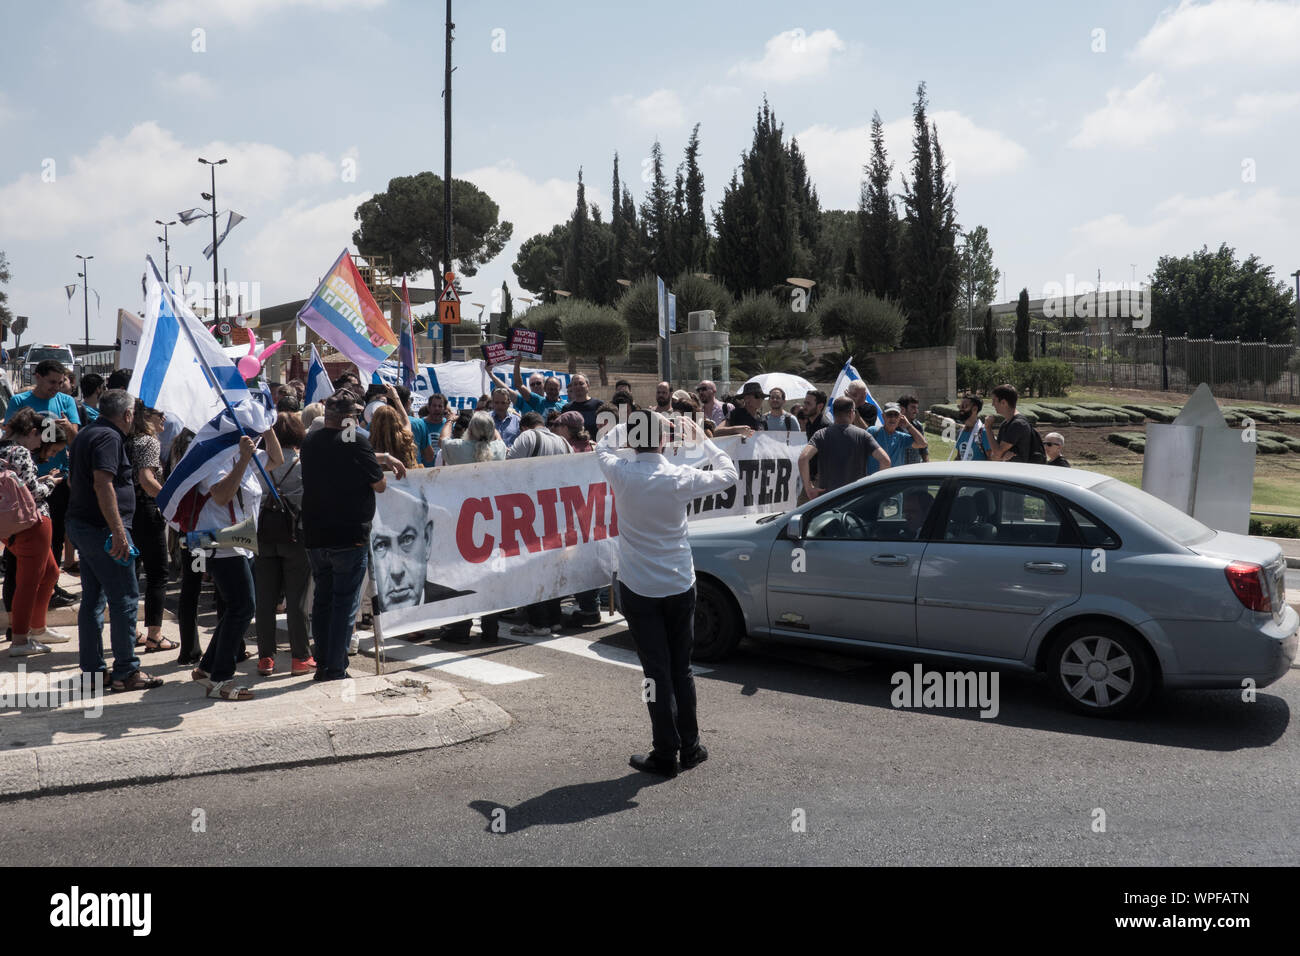 Jerusalem, Israel. 9th September, 2019. Democratic Union activists block the access road to the Israeli Parliament protesting against PM Netanyahu citing criminal suspicions, immoral campaigning and a blitz attempt to legislate the allowance of cameras inside election ballot booths. An assortment of political parties demonstrated in front of the Israeli Parliament building with similar messages ahead of round two of the national elections for parliament scheduled for 17th September, 2019. Credit: Nir Alon/Alamy Live News. Credit: Nir Alon/Alamy Live News Stock Photo